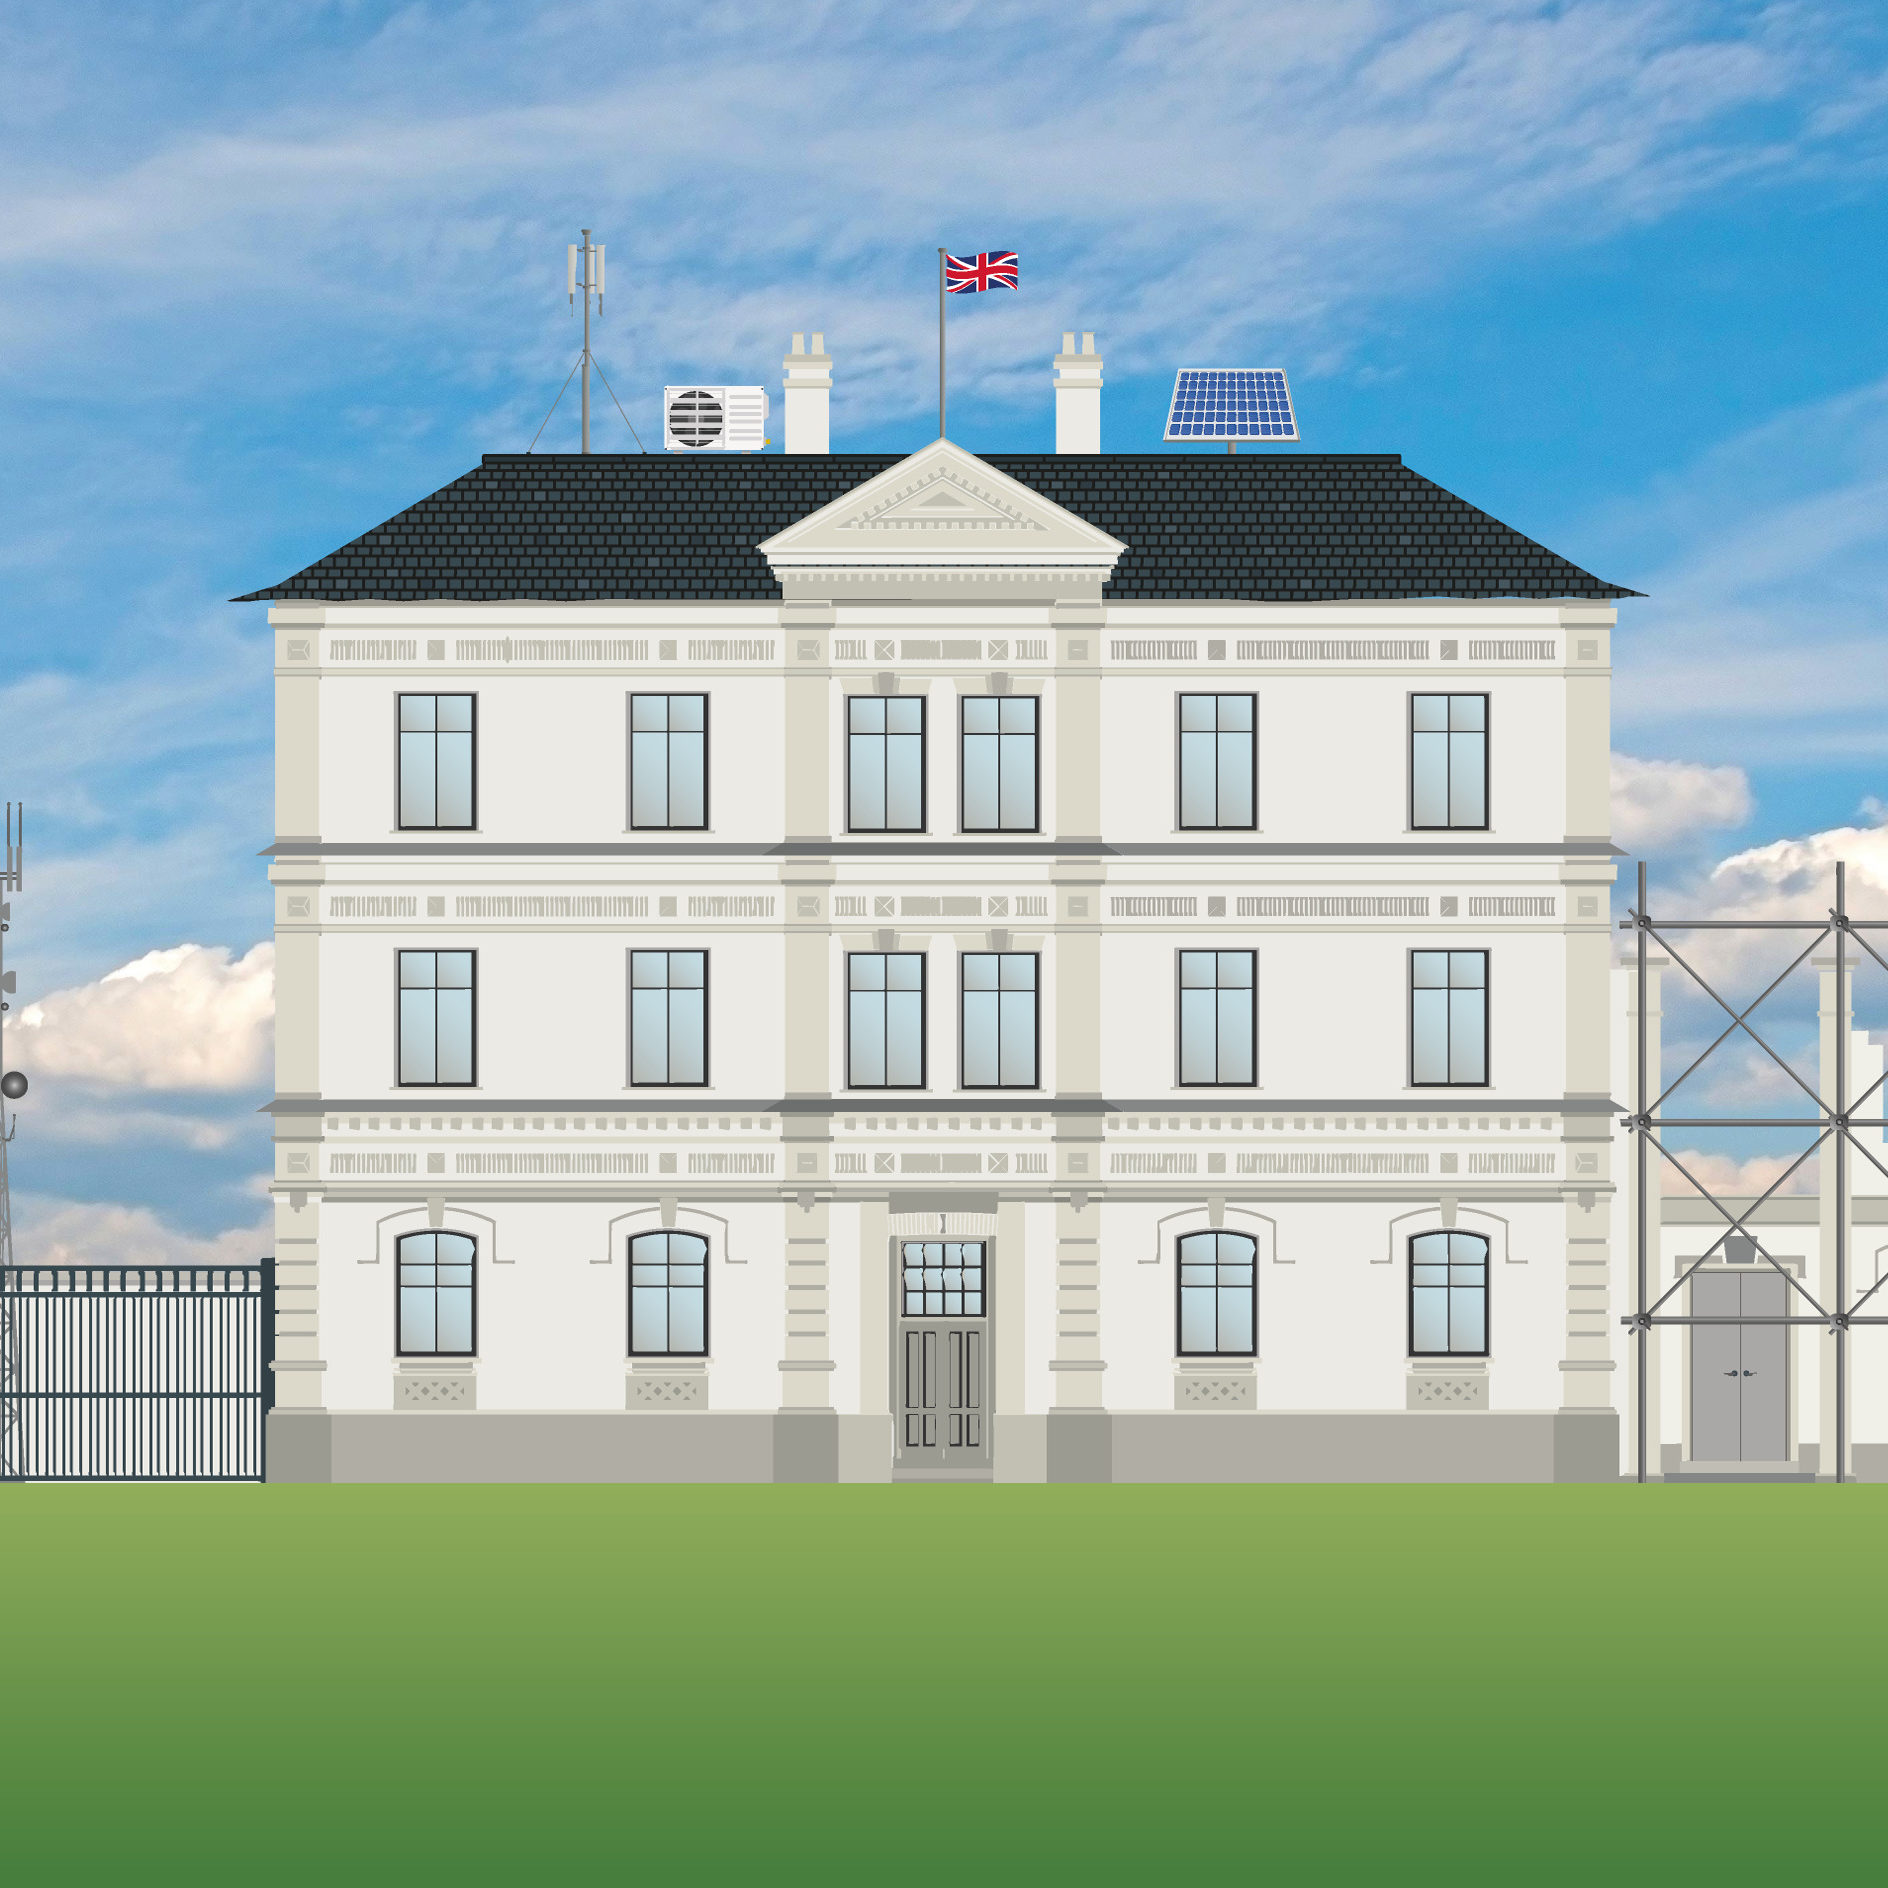 Grand looking embassy with Union Jack flag and solar panels on it's roof. Illustration.